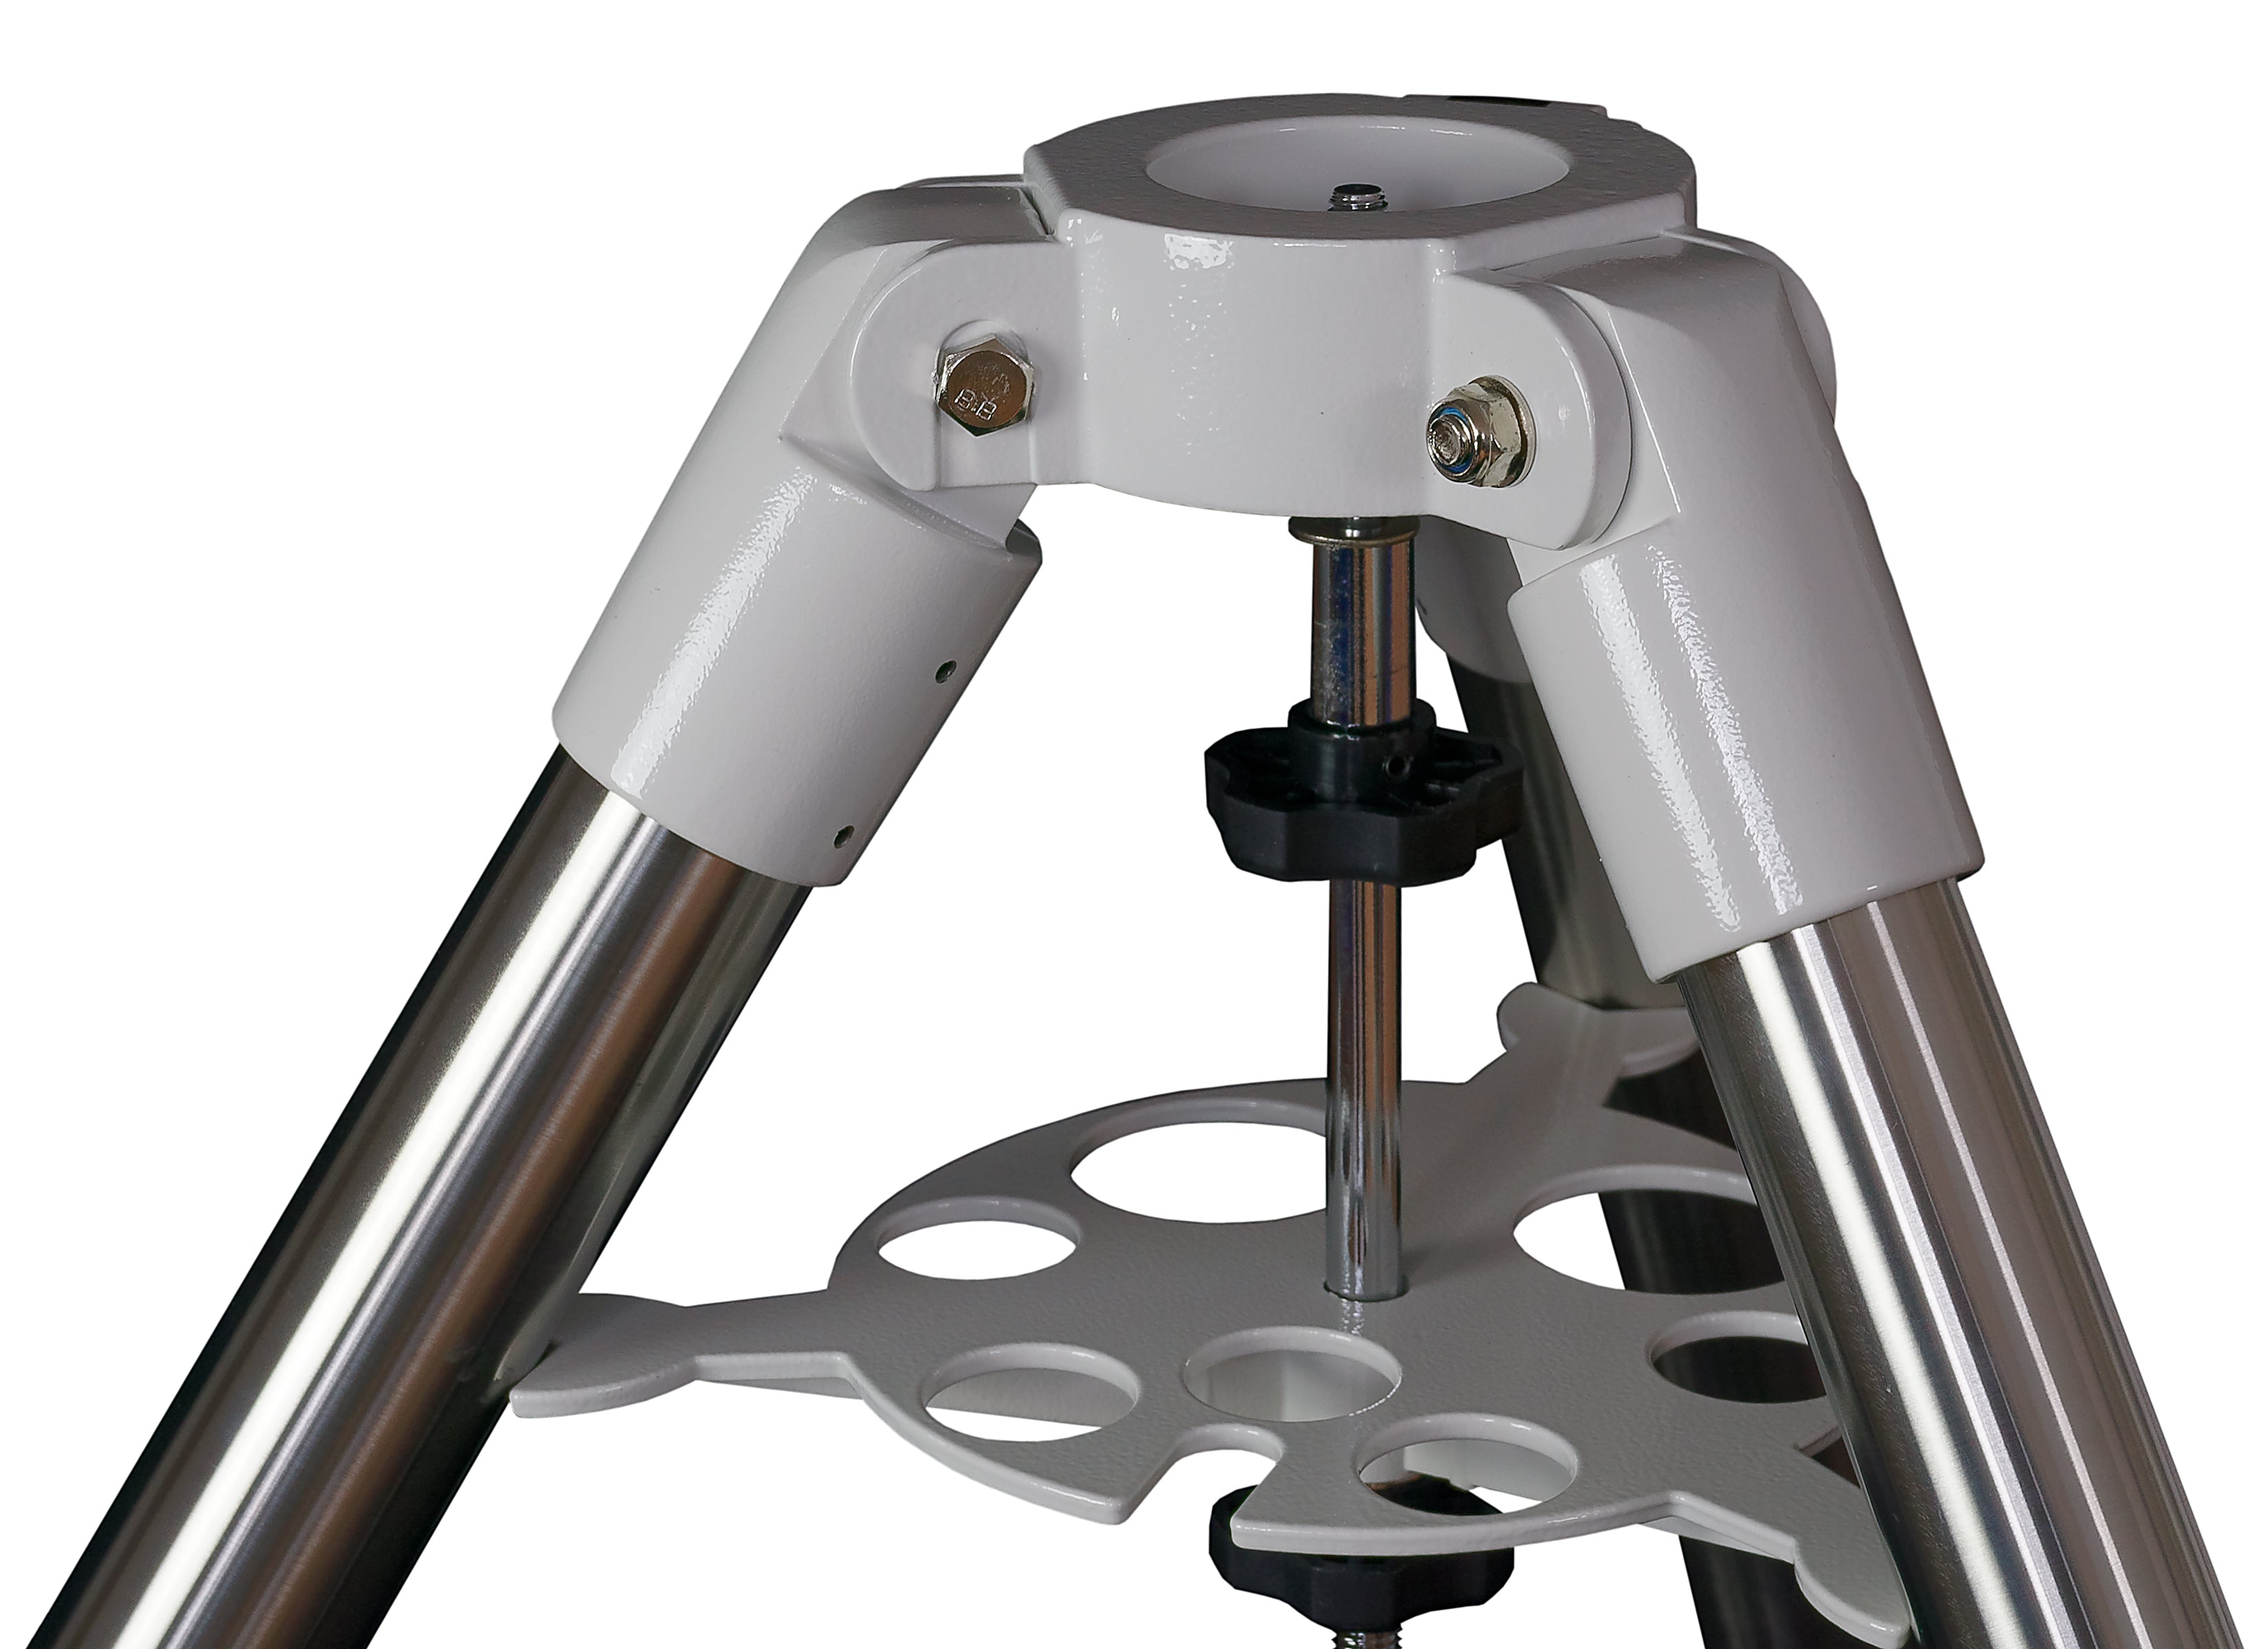 Skywatcher 3/8" stainless steel tripod with 1.75" diameter legs. Astronomy 20316